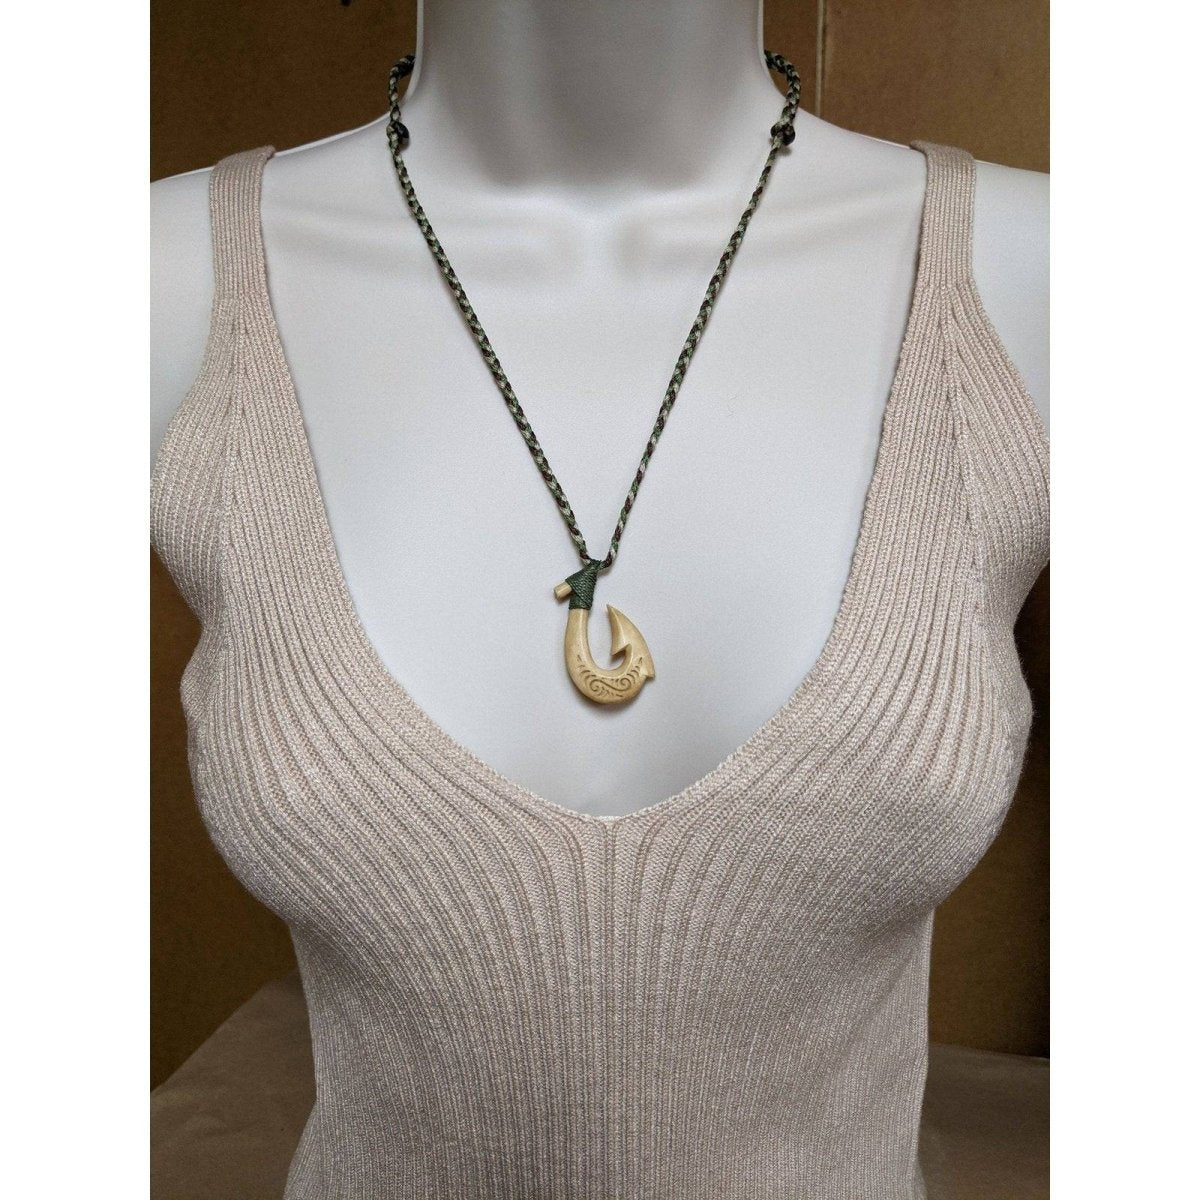 Hawaiian Stylized Aged Bone Fish Hook Necklace - Earthbound Pacific